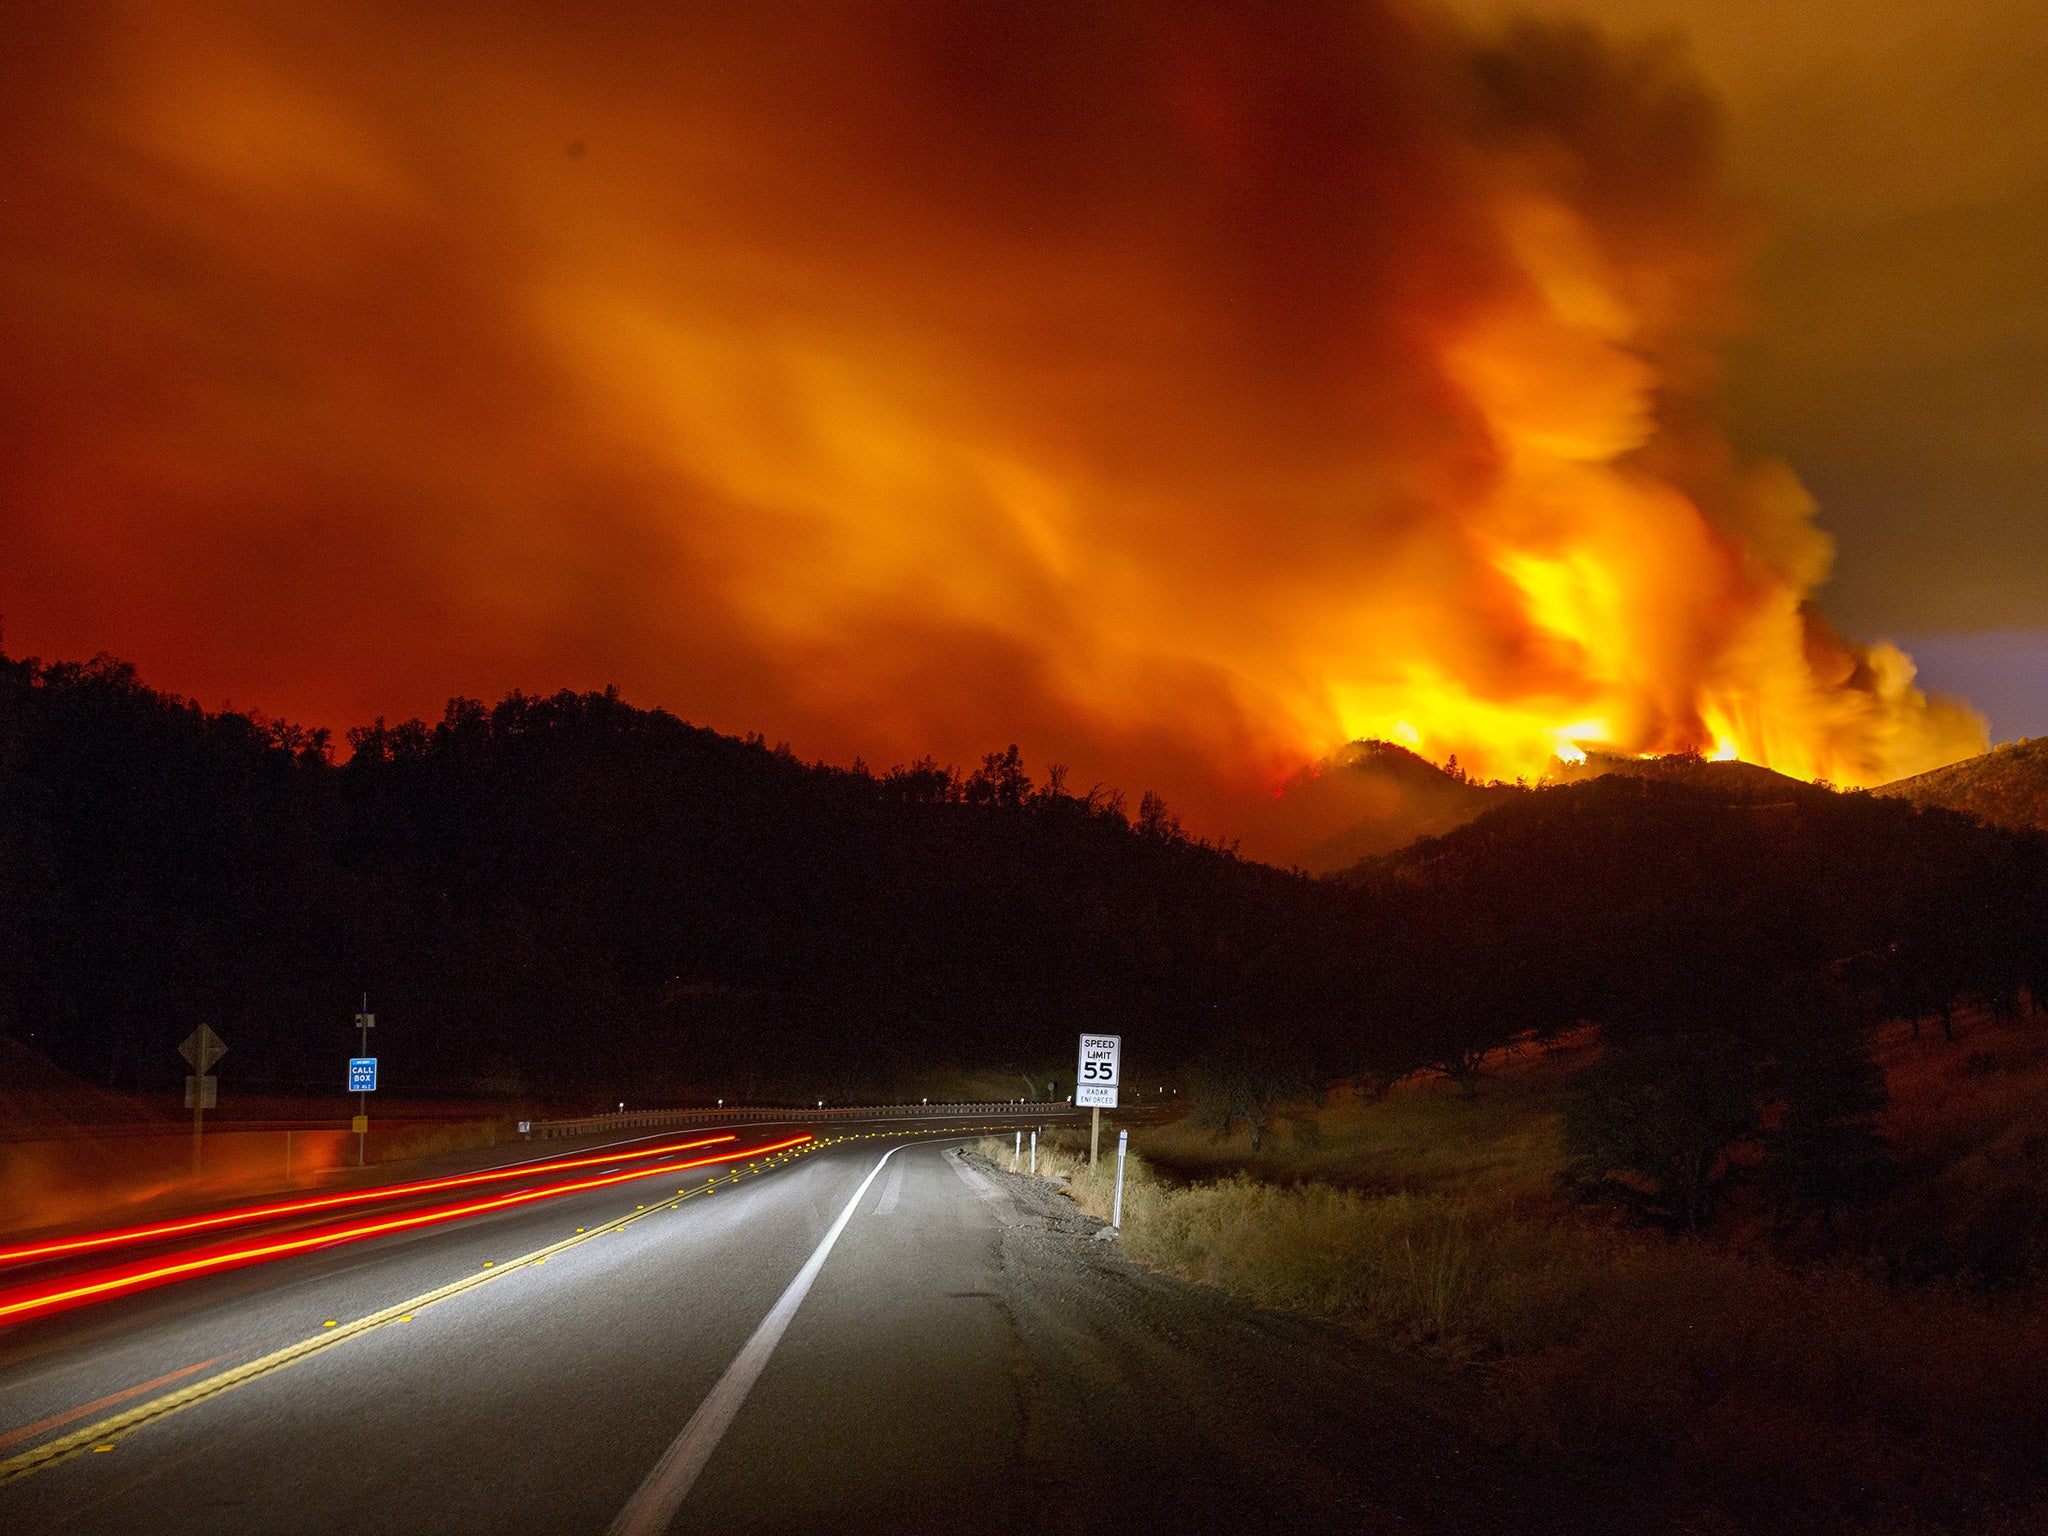 The Rocky Fire in California earlier this month, where 9,000 firefighters tried to contain a blaze that ravaged 60,000 acres 